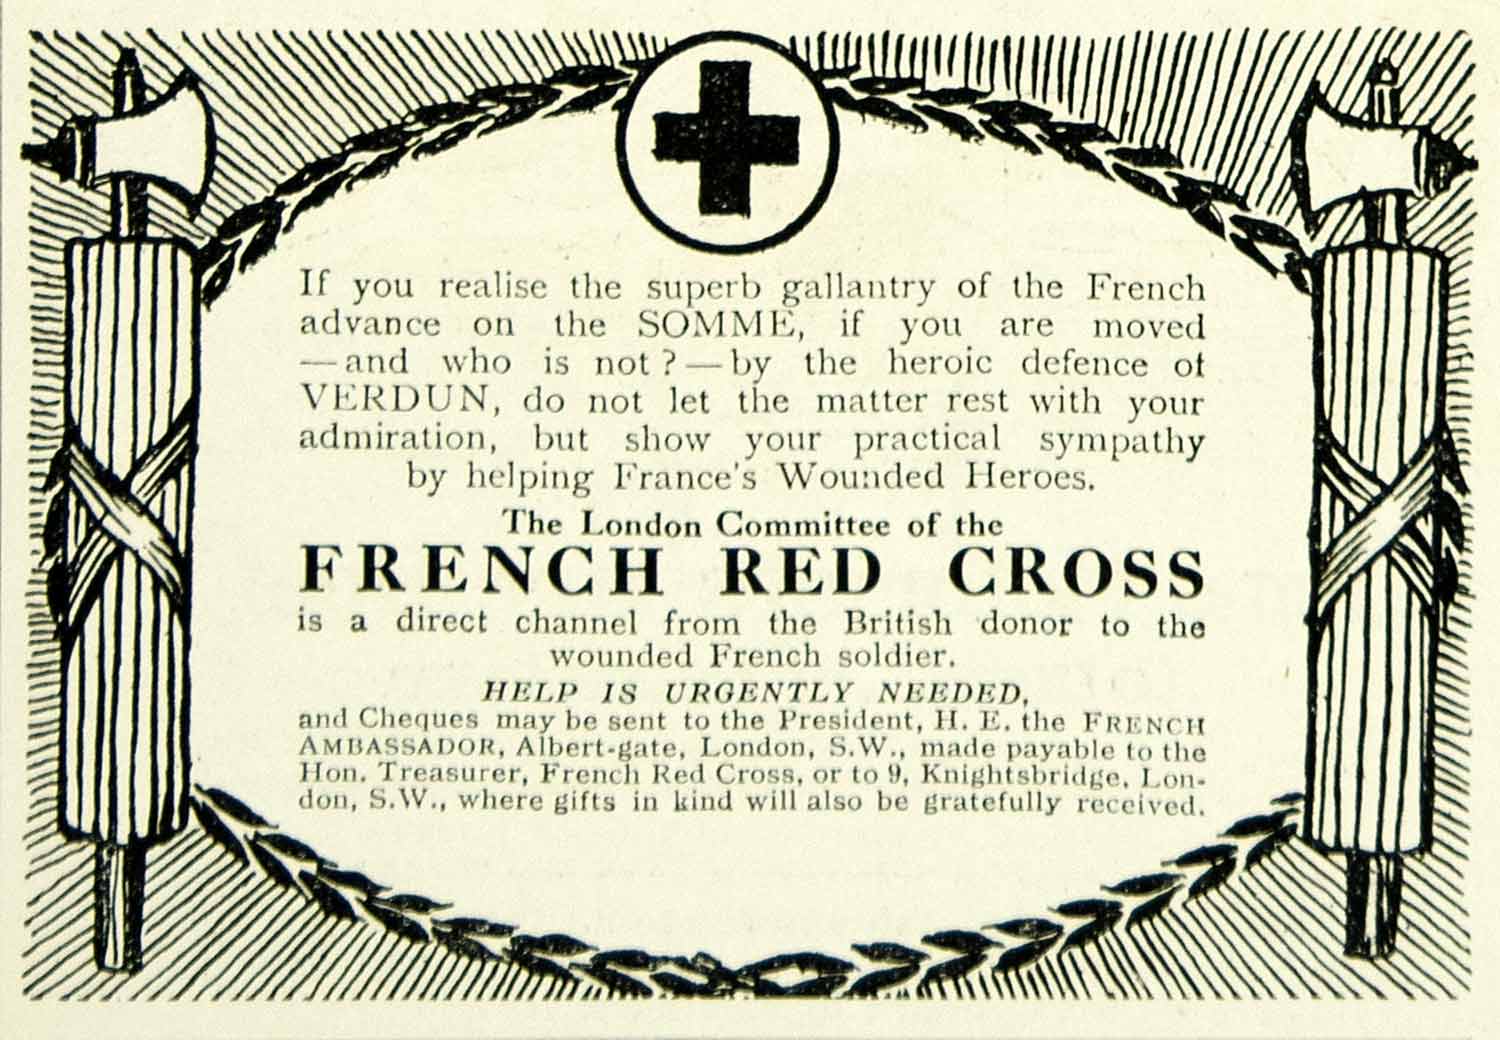 1916 Ad Vintage World War I French Red Cross British Donations Wartime Advert